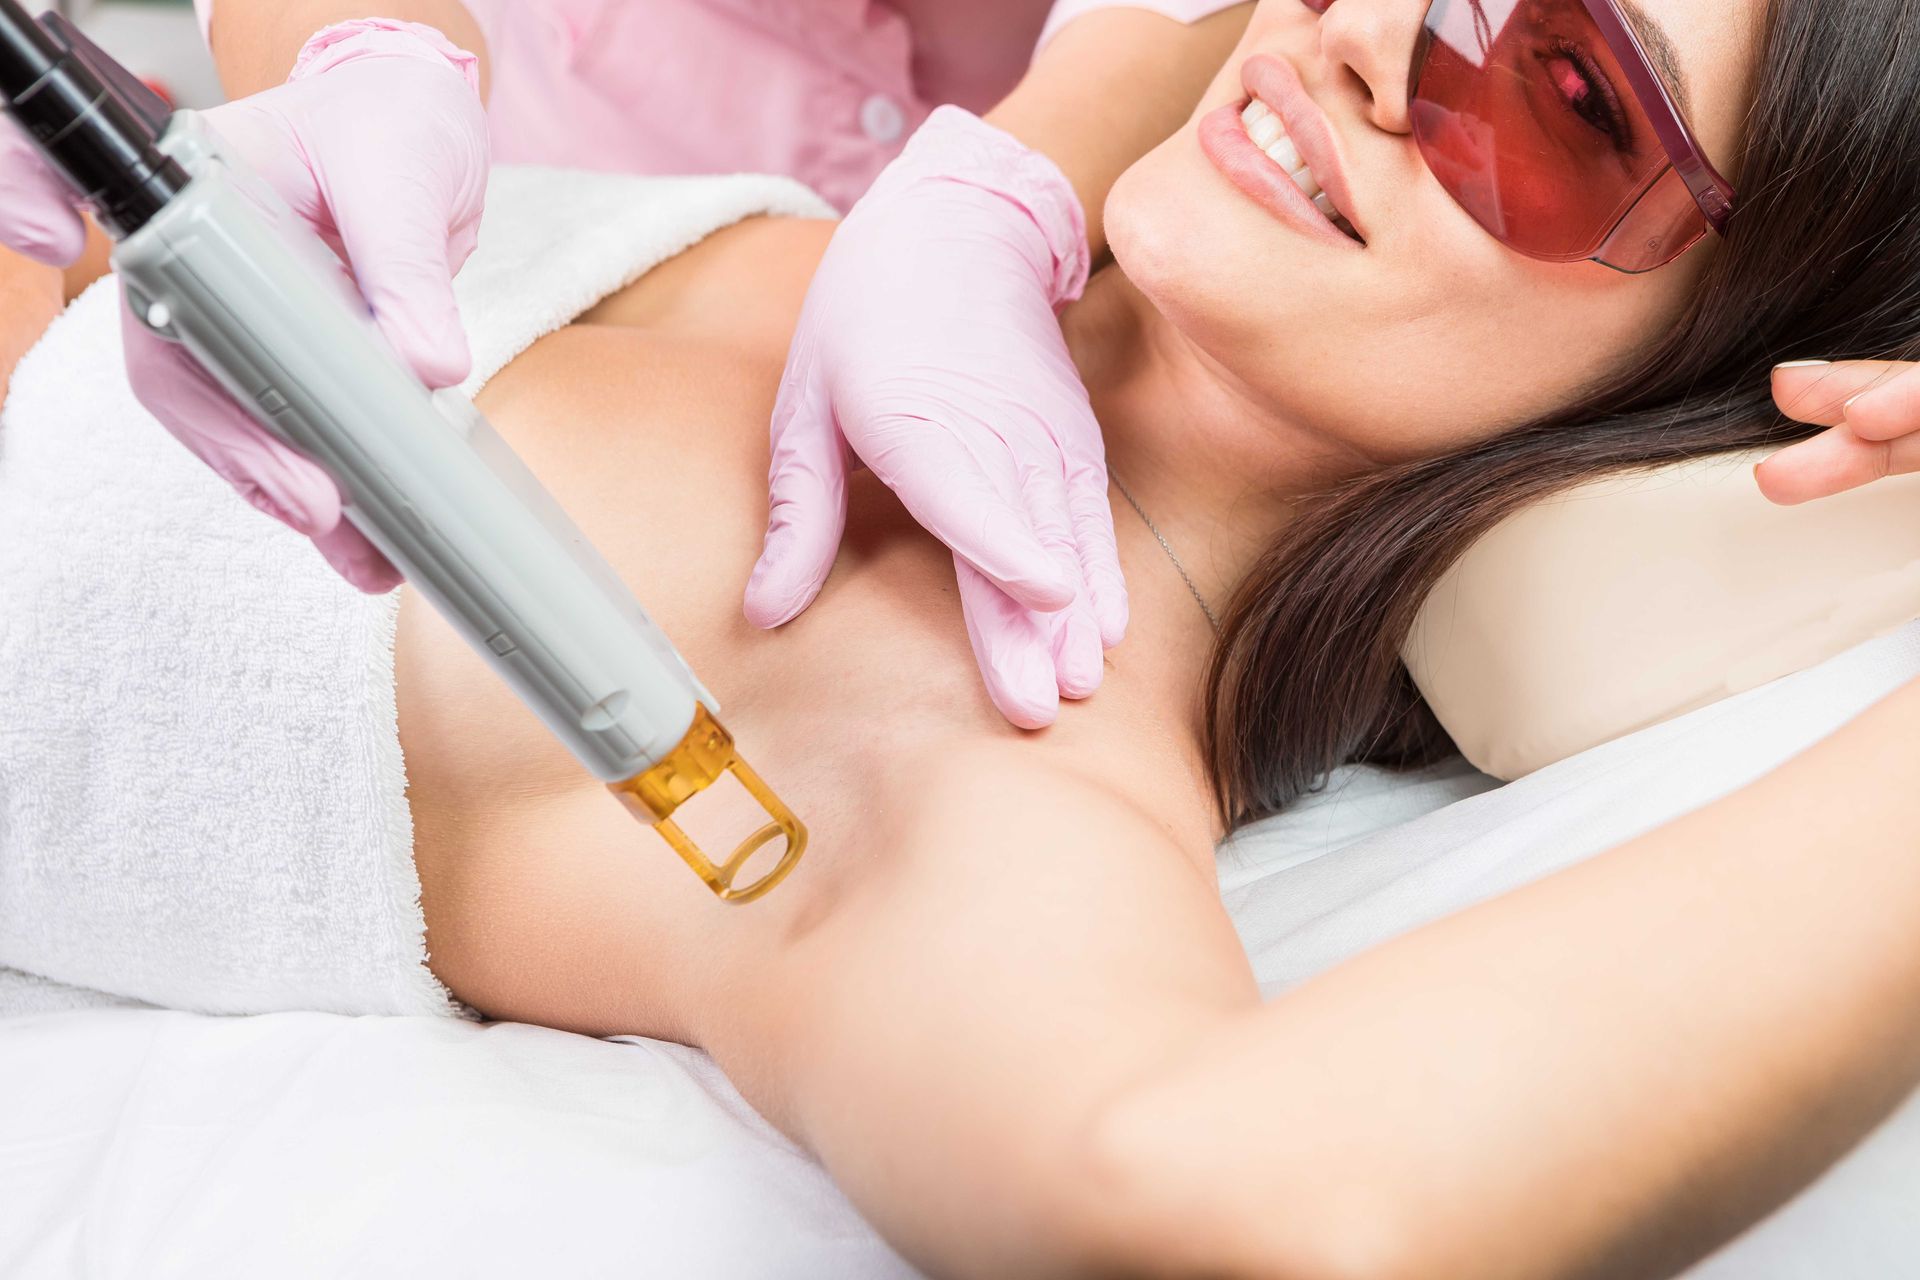 A woman is getting a laser hair removal treatment on her armpit